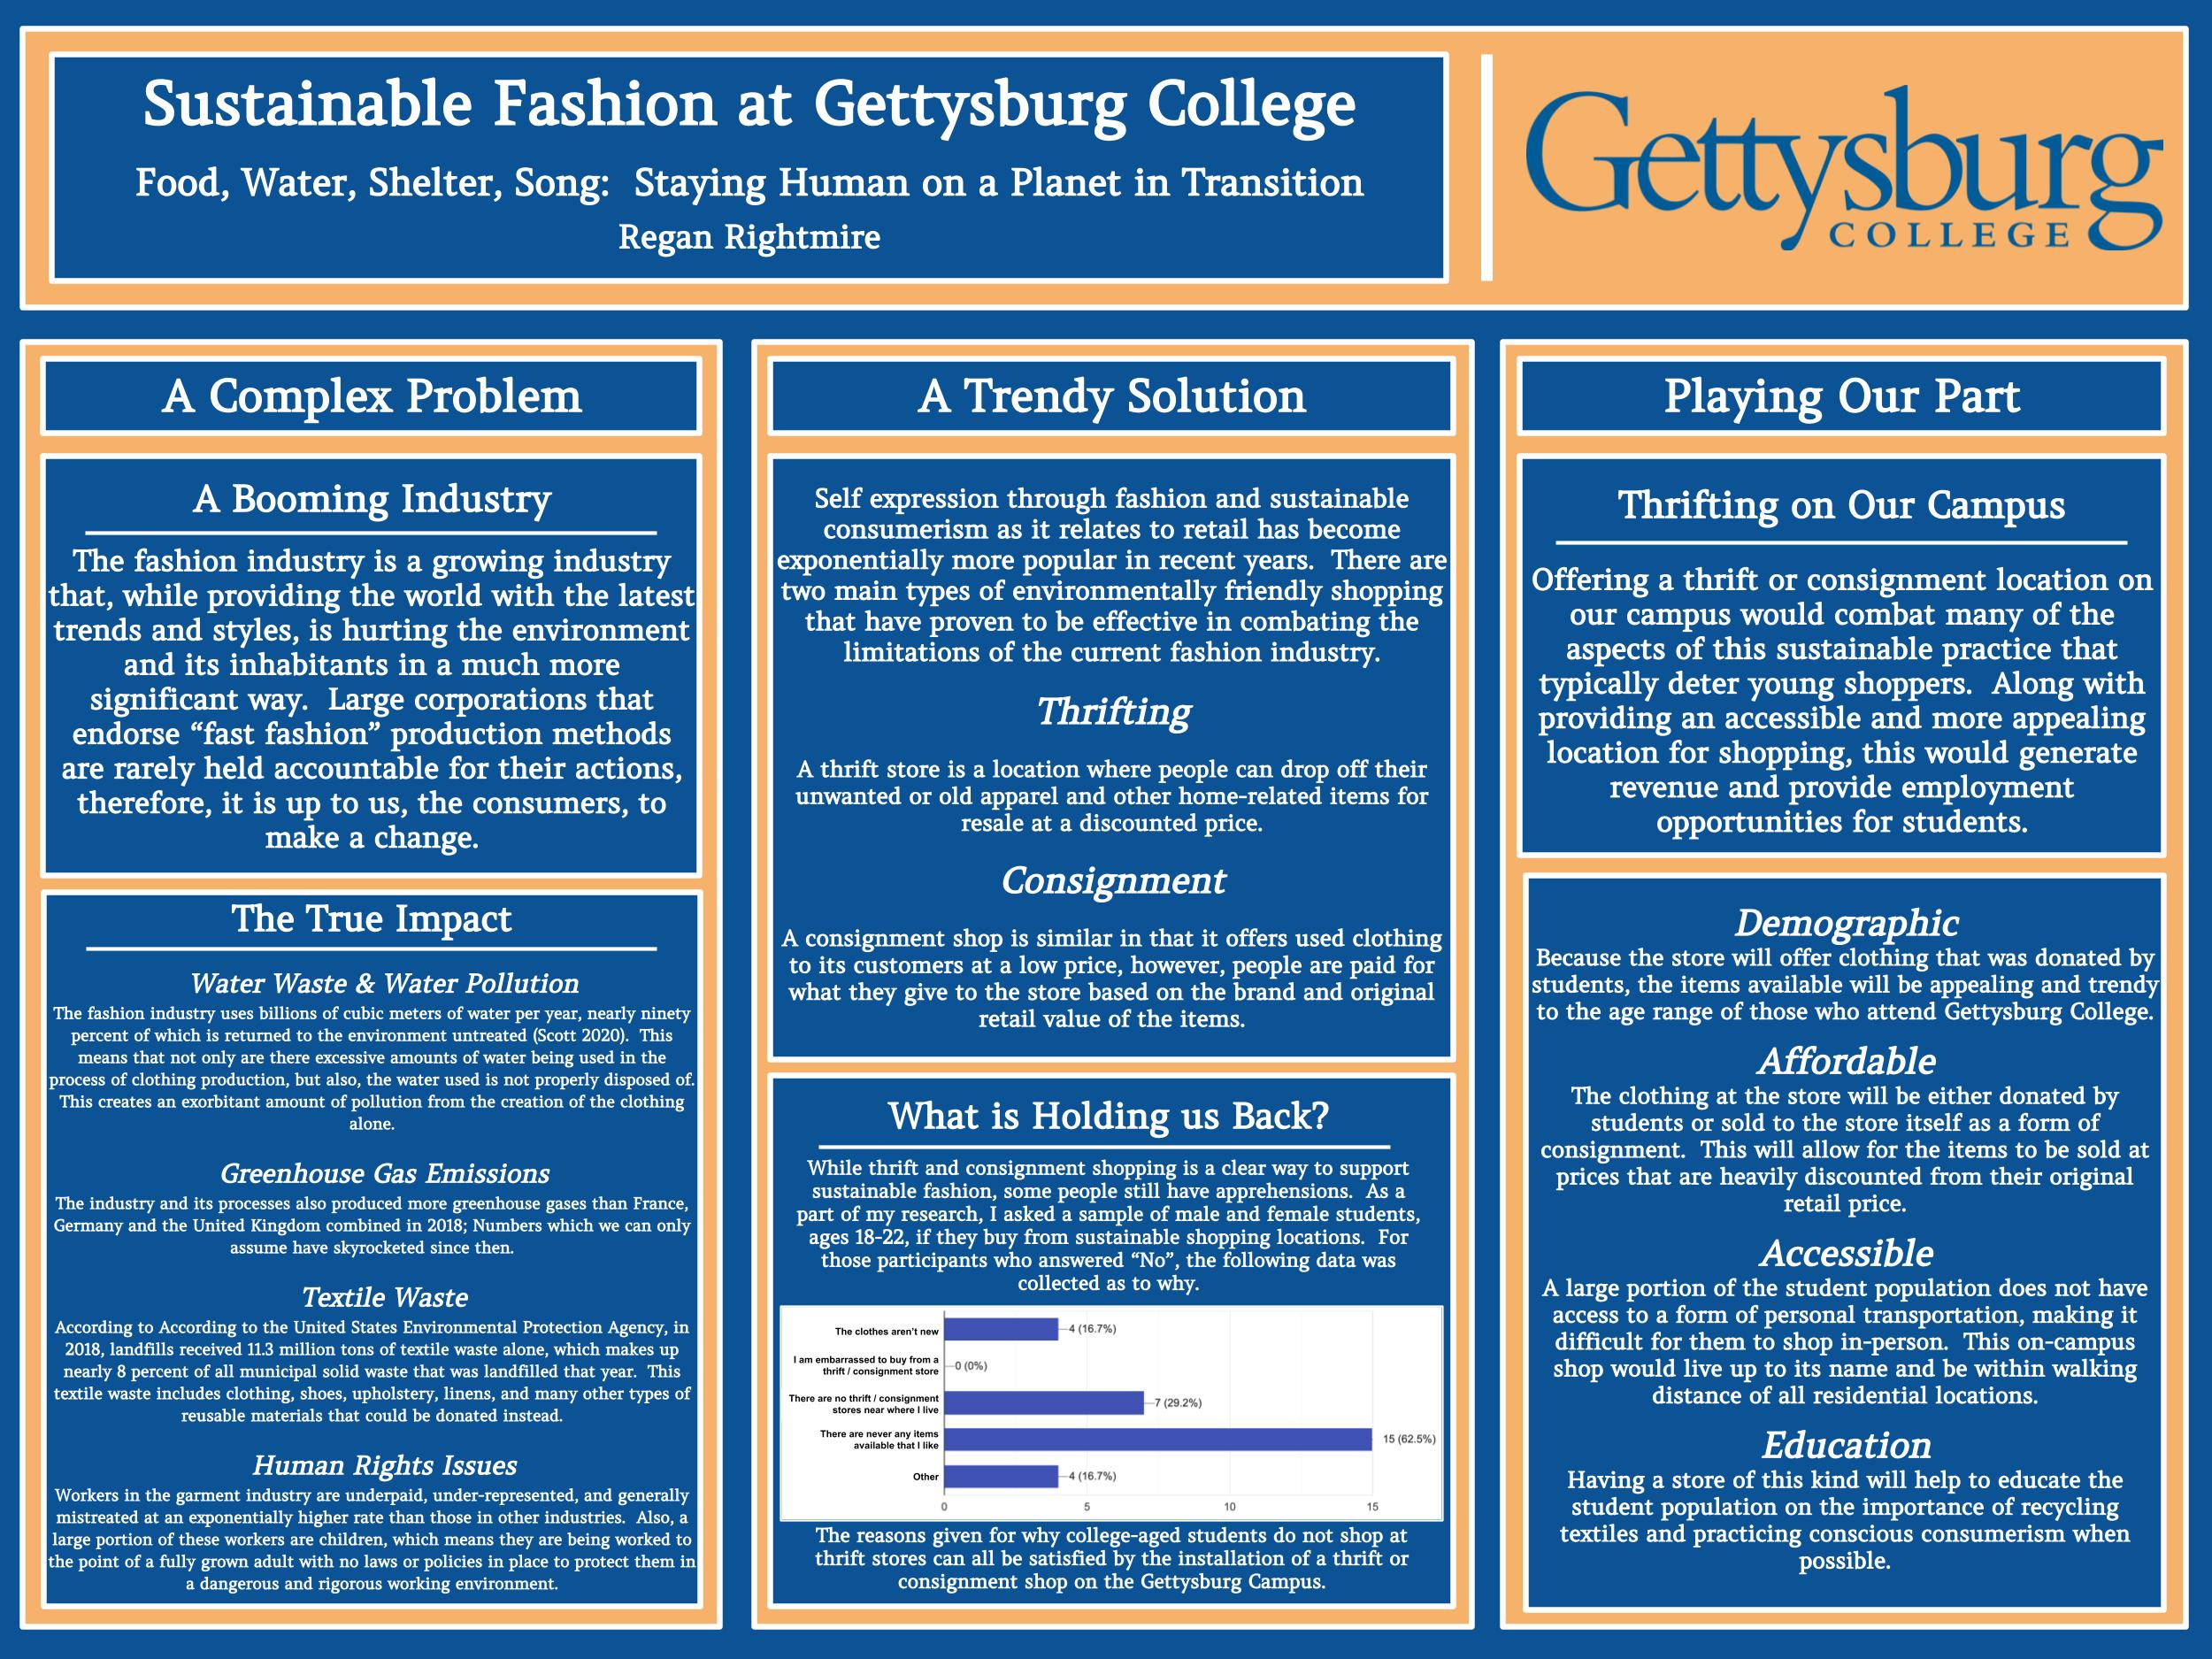 Showcase Image for Sustainable Fashion at Gettysburg College